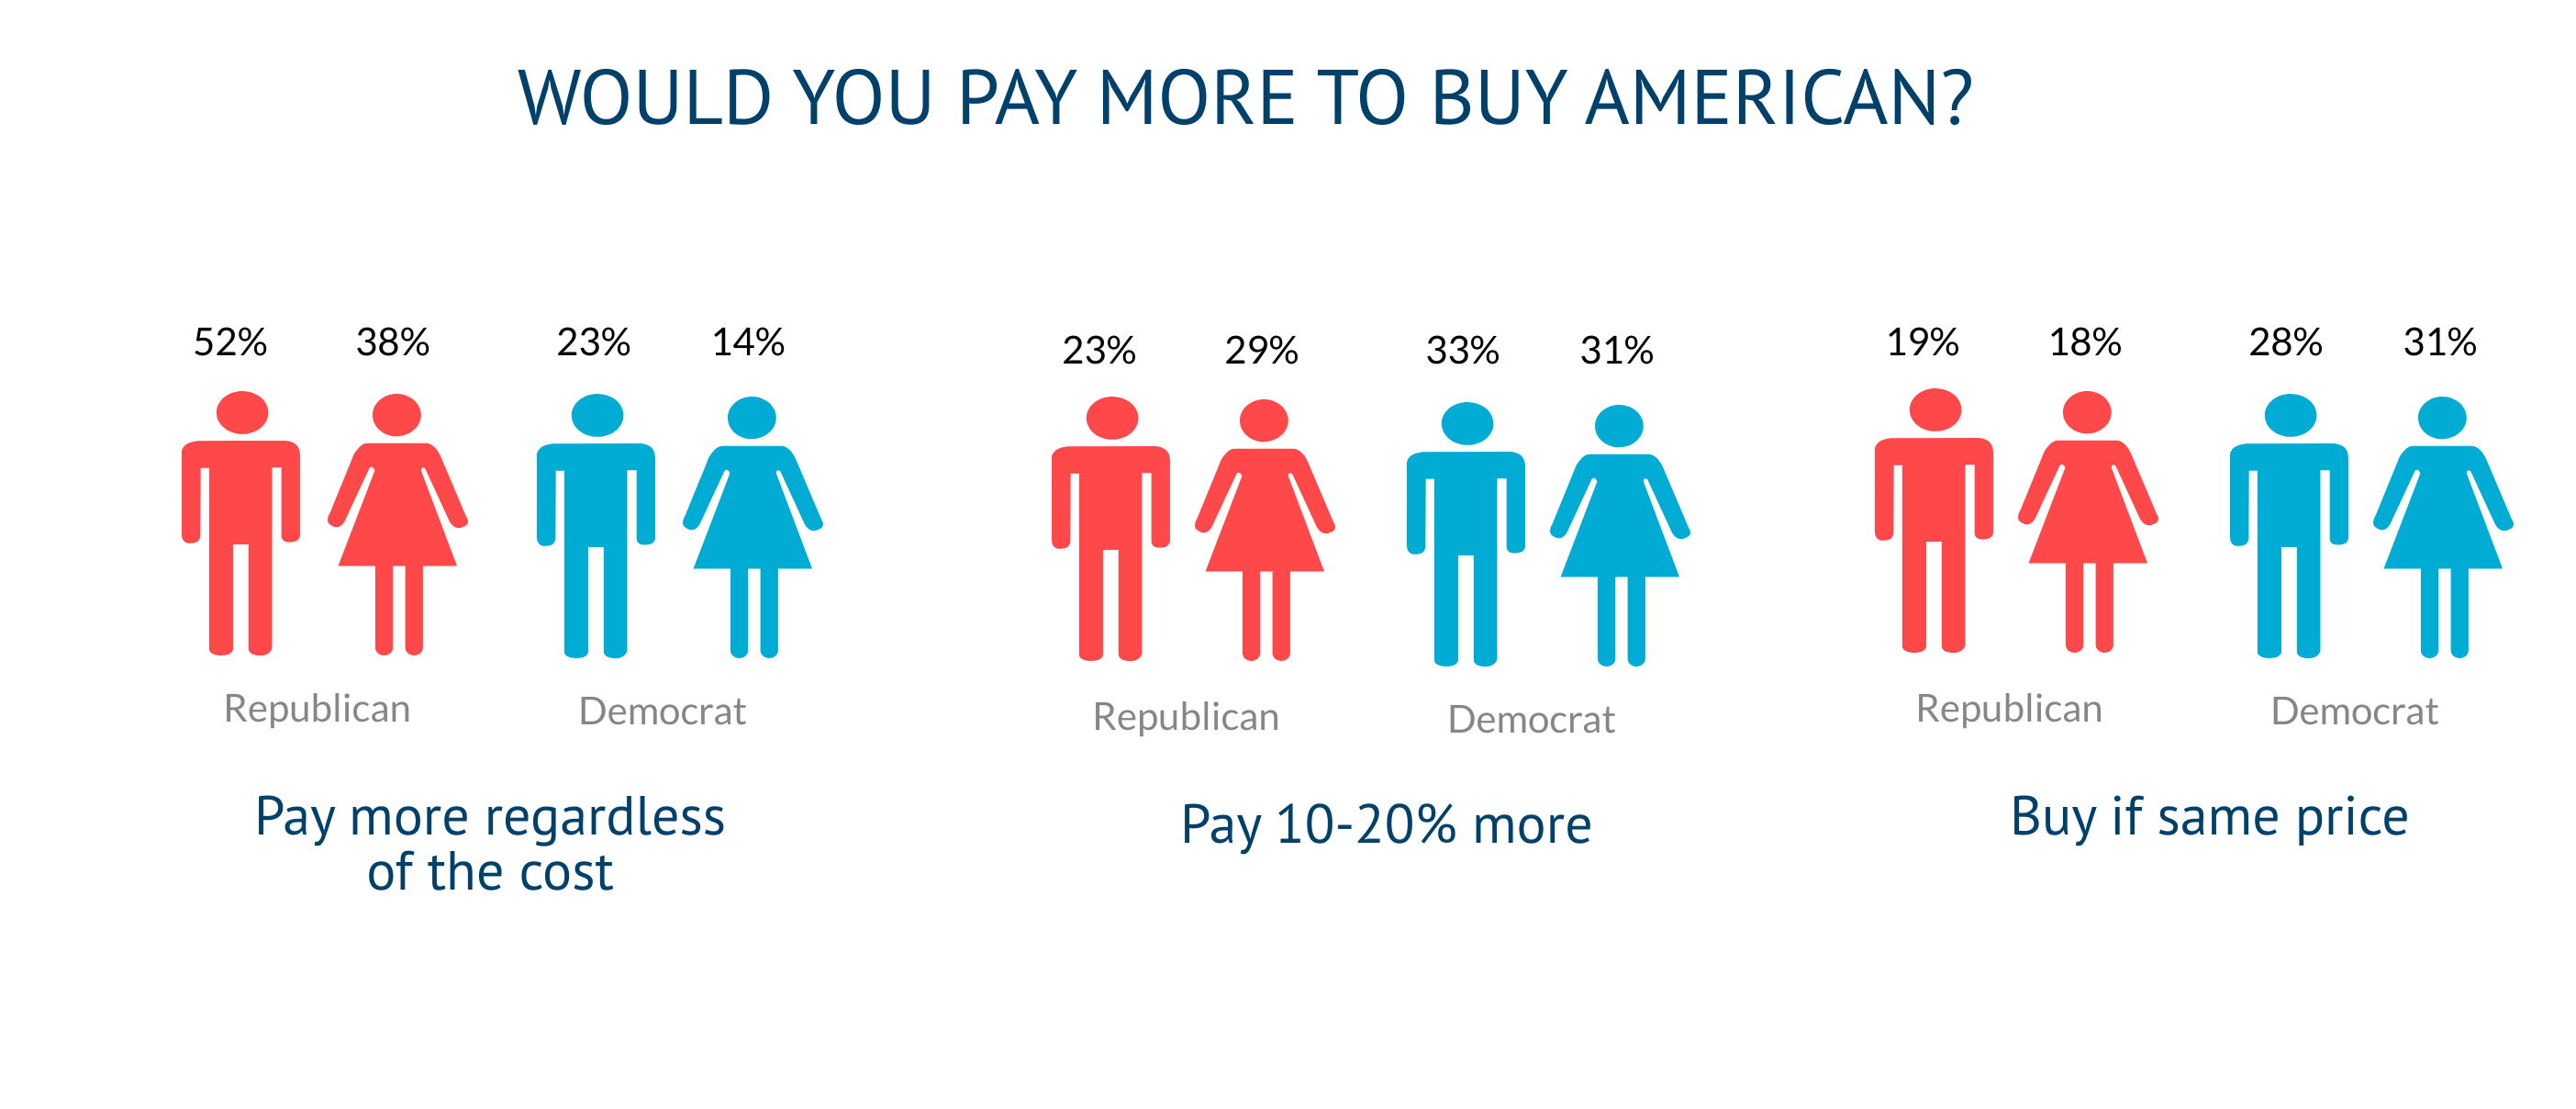 Q3 Would you pay more by gender and party